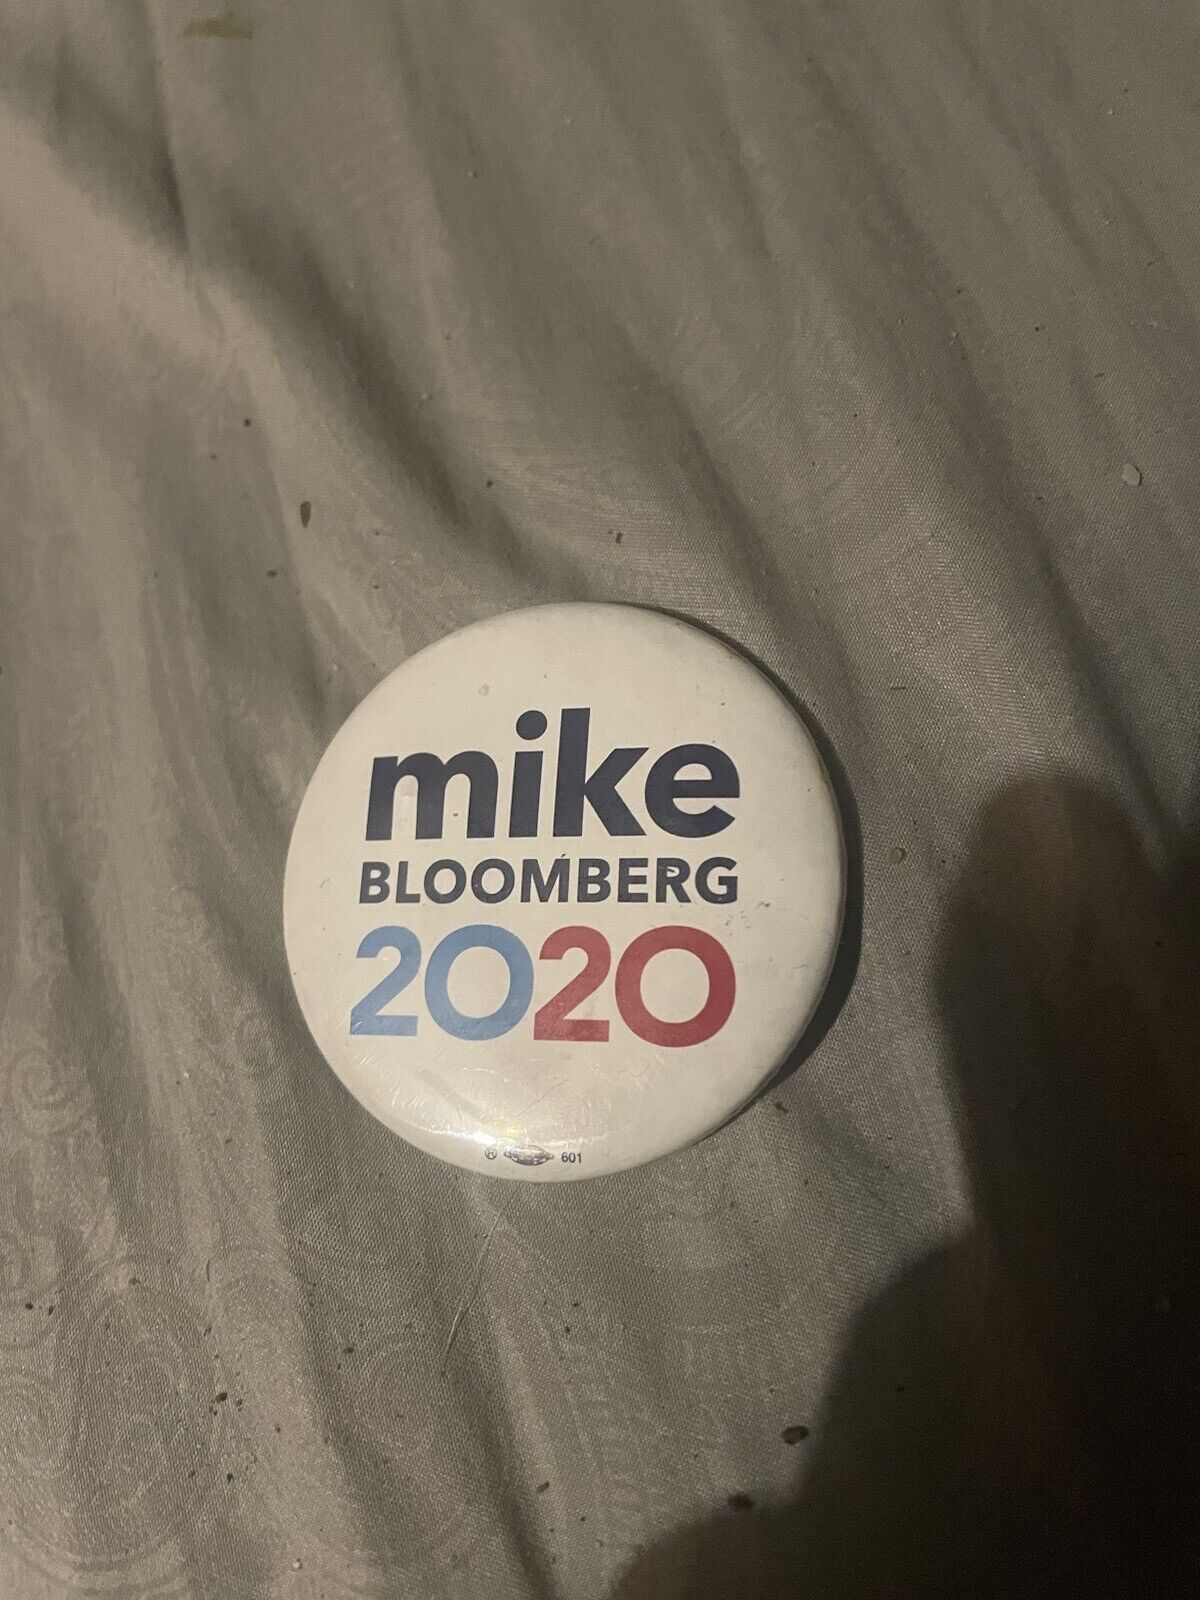 Mike Bloomberg 2020 Presidential Campaign Button